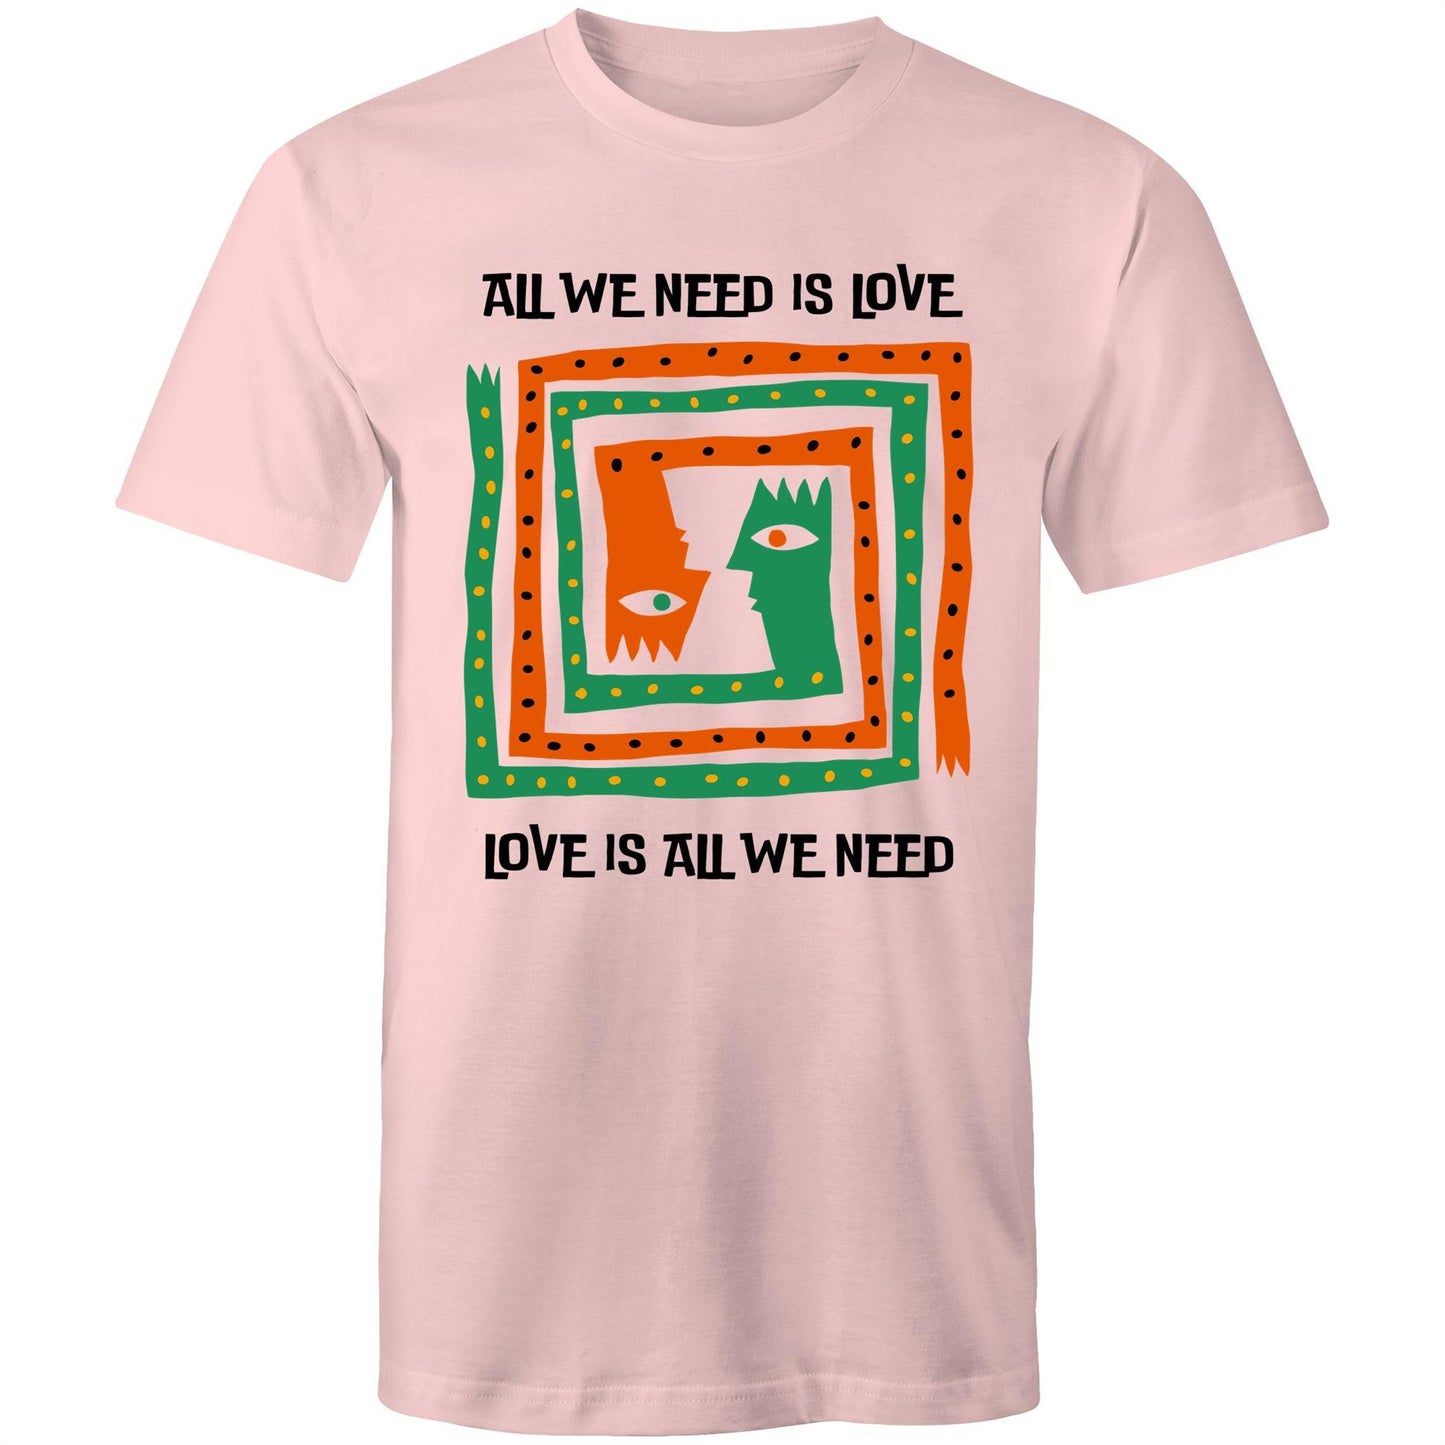 All We Need Is Love - Mens T-Shirt Pink Mens T-shirt